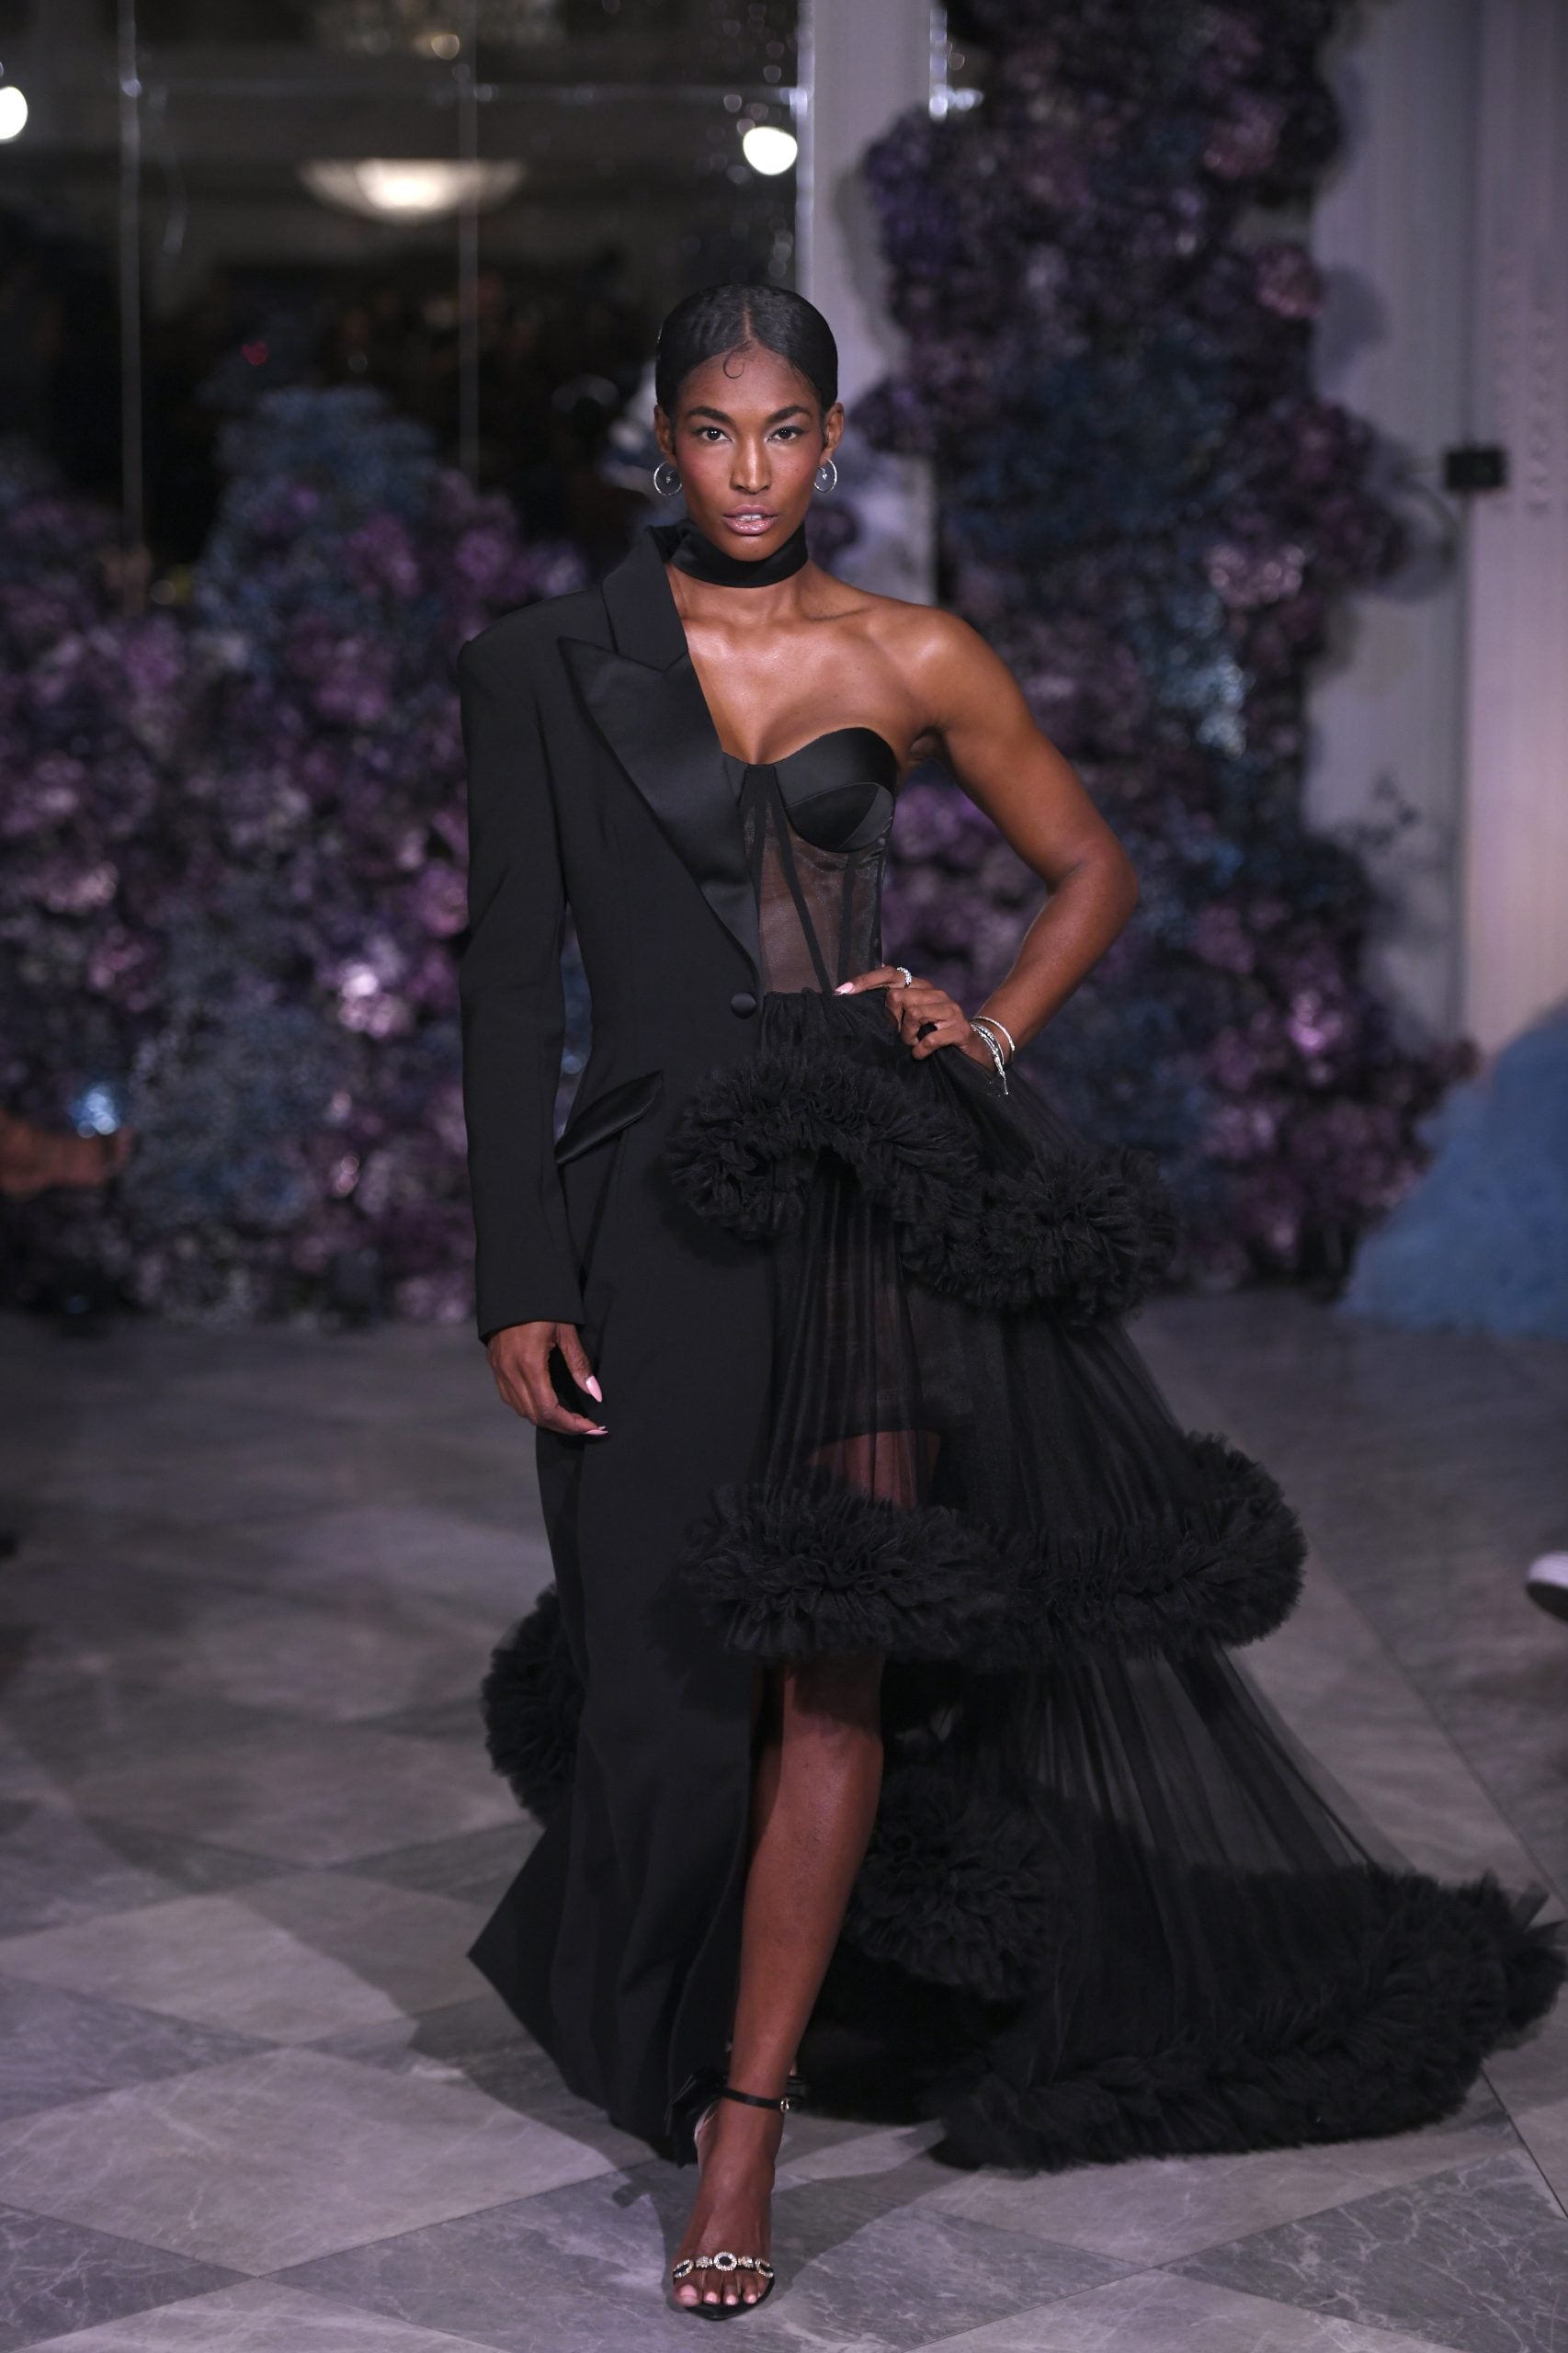 Christian Siriano Takes Balletcore To Fantastical New Heights